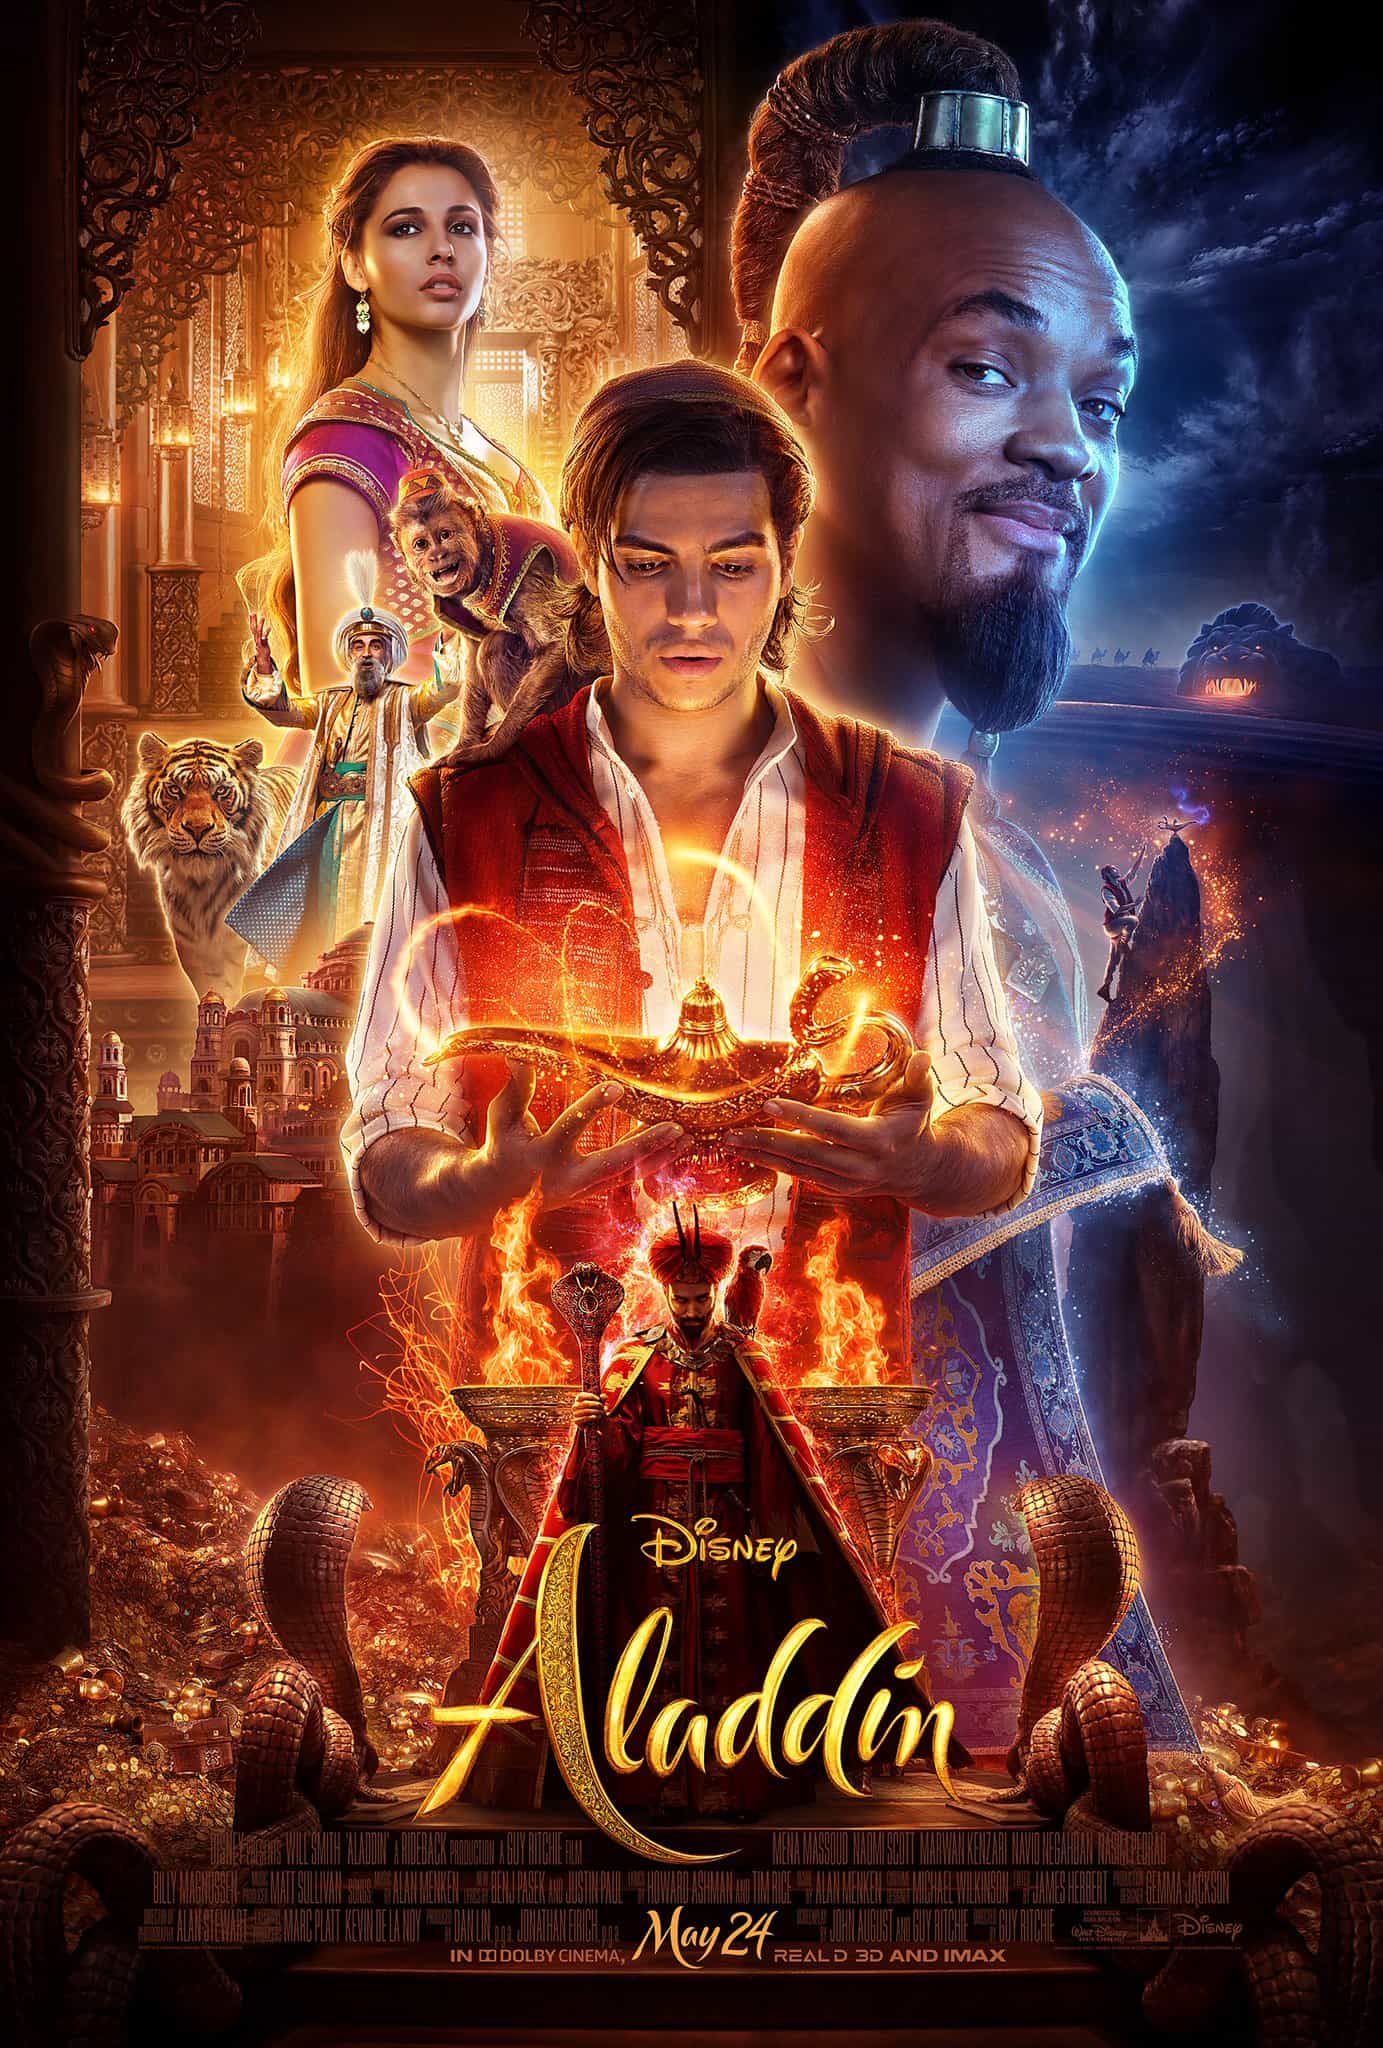 UK Box Office Analysis 24th - 26th May 2019:  Aladdin flies to the top on its opening with a 7 million pound bank holiday weekend debut leaving Rocketman to enter at 2